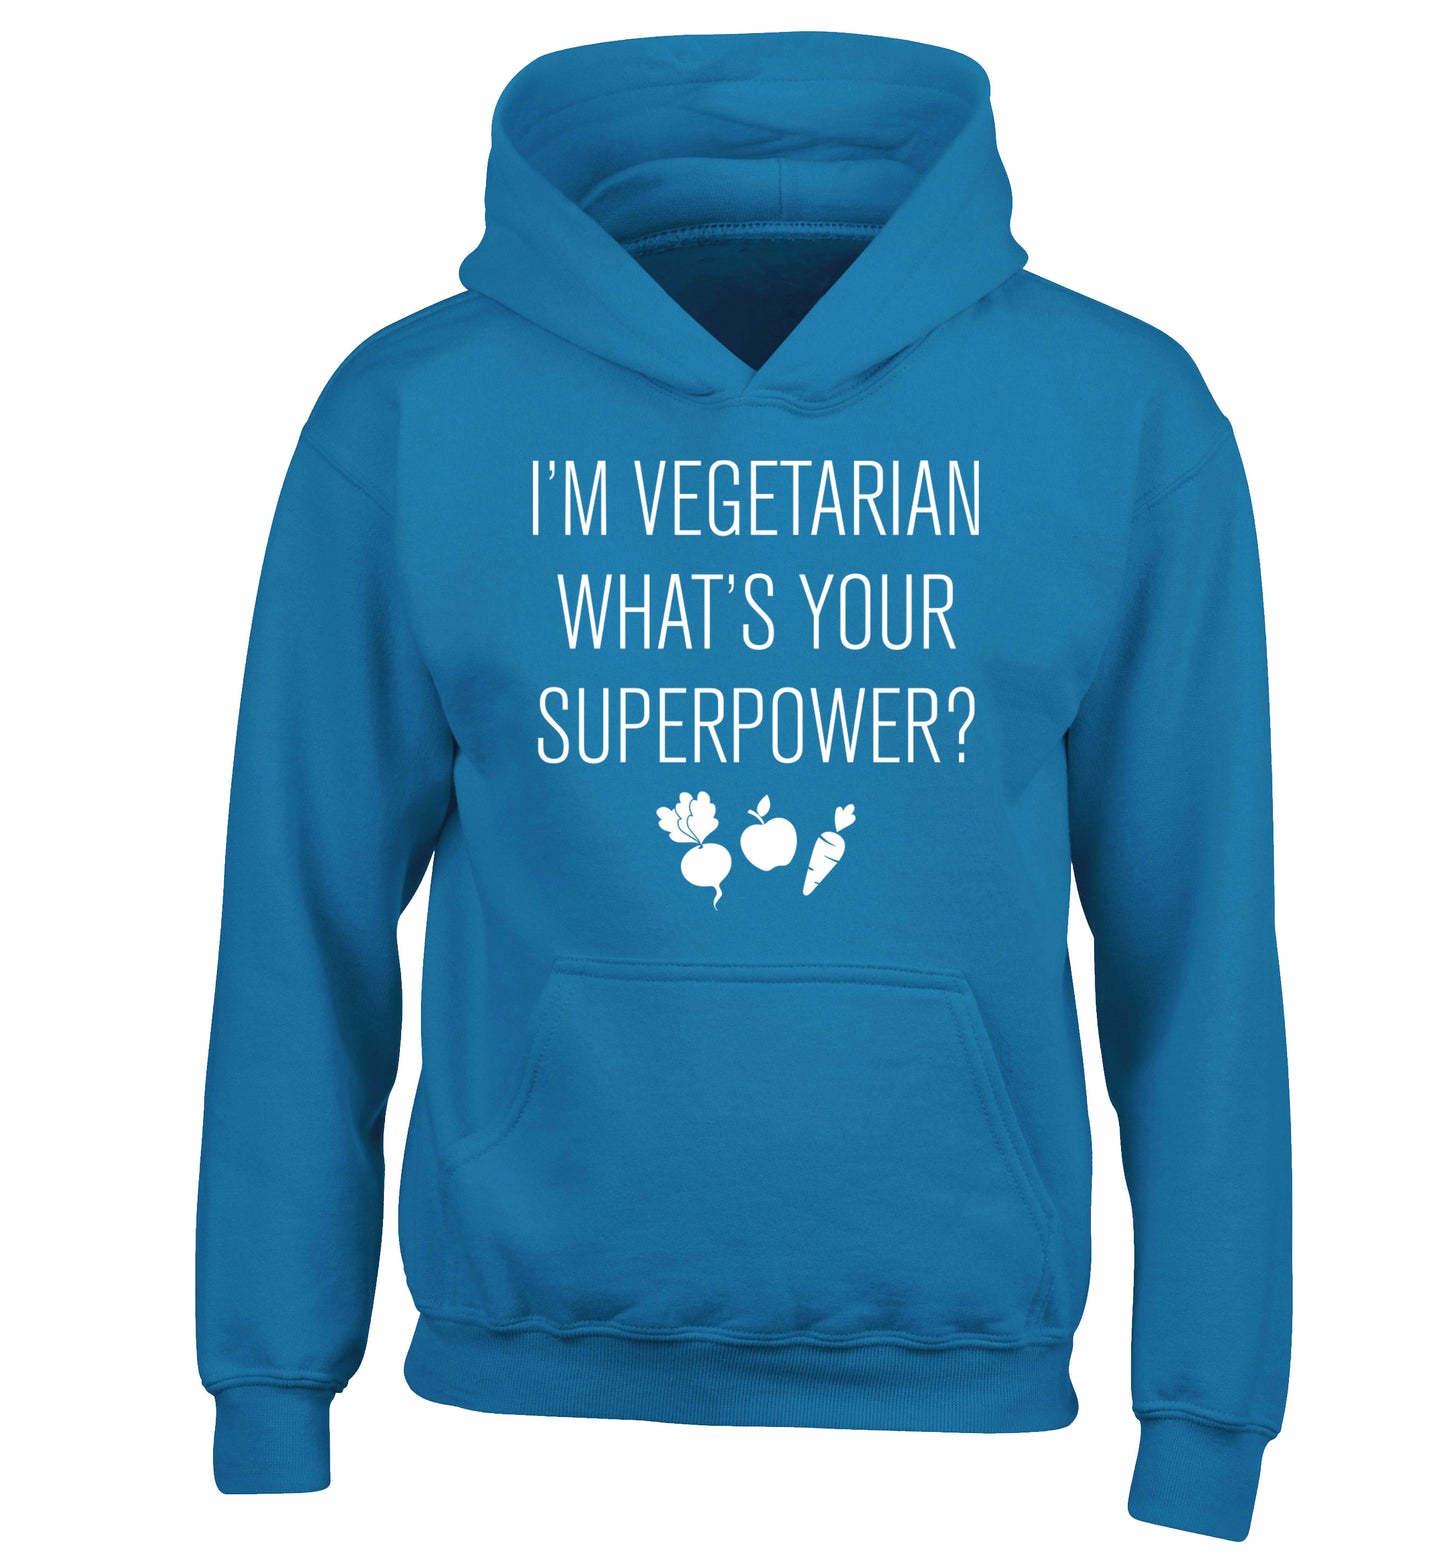 I'm vegetarian what's your superpower? children's blue hoodie 12-13 Years